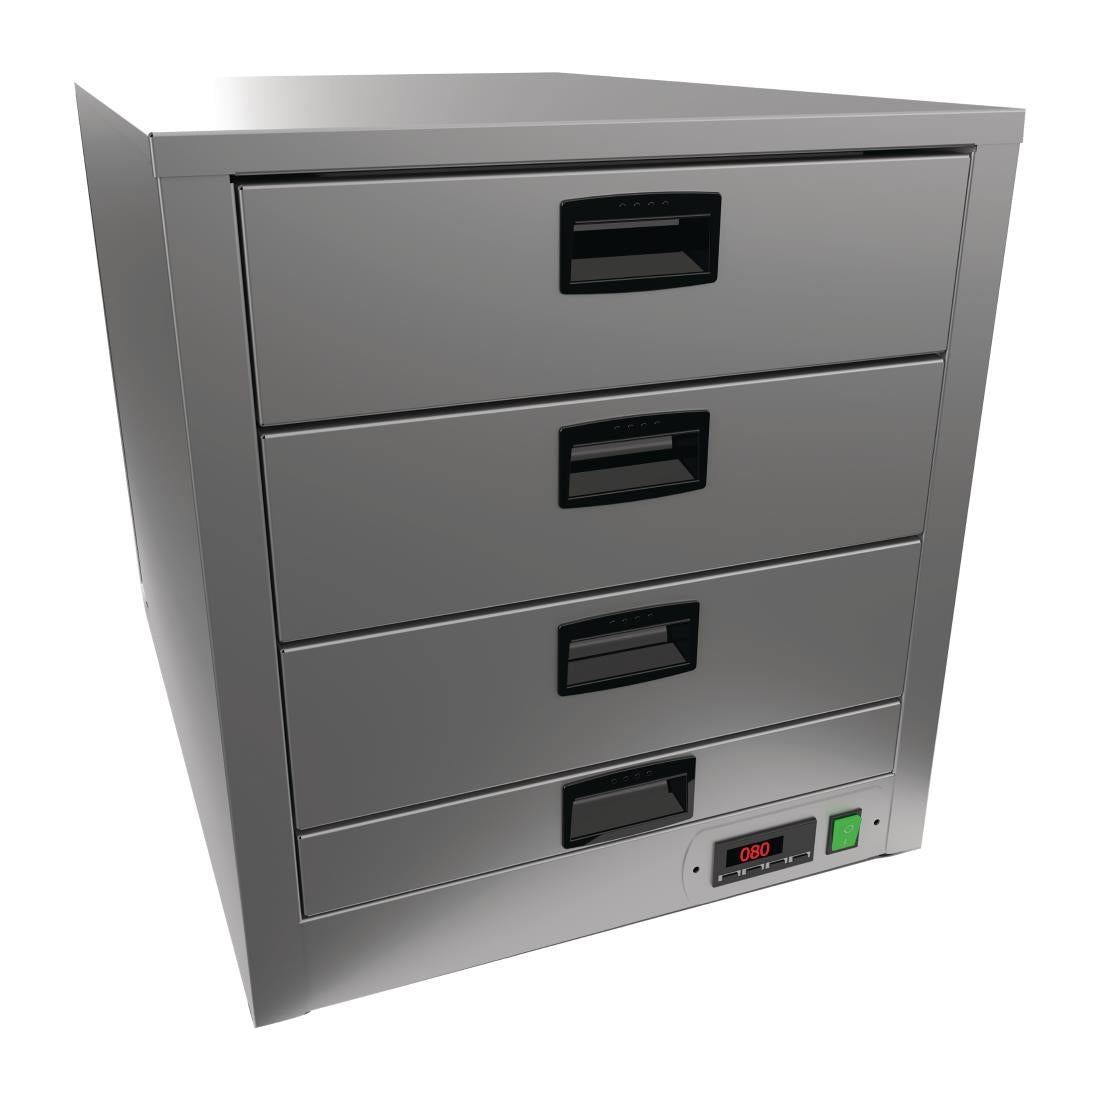 DR417 Moffat Warming Drawers GHD3 JD Catering Equipment Solutions Ltd